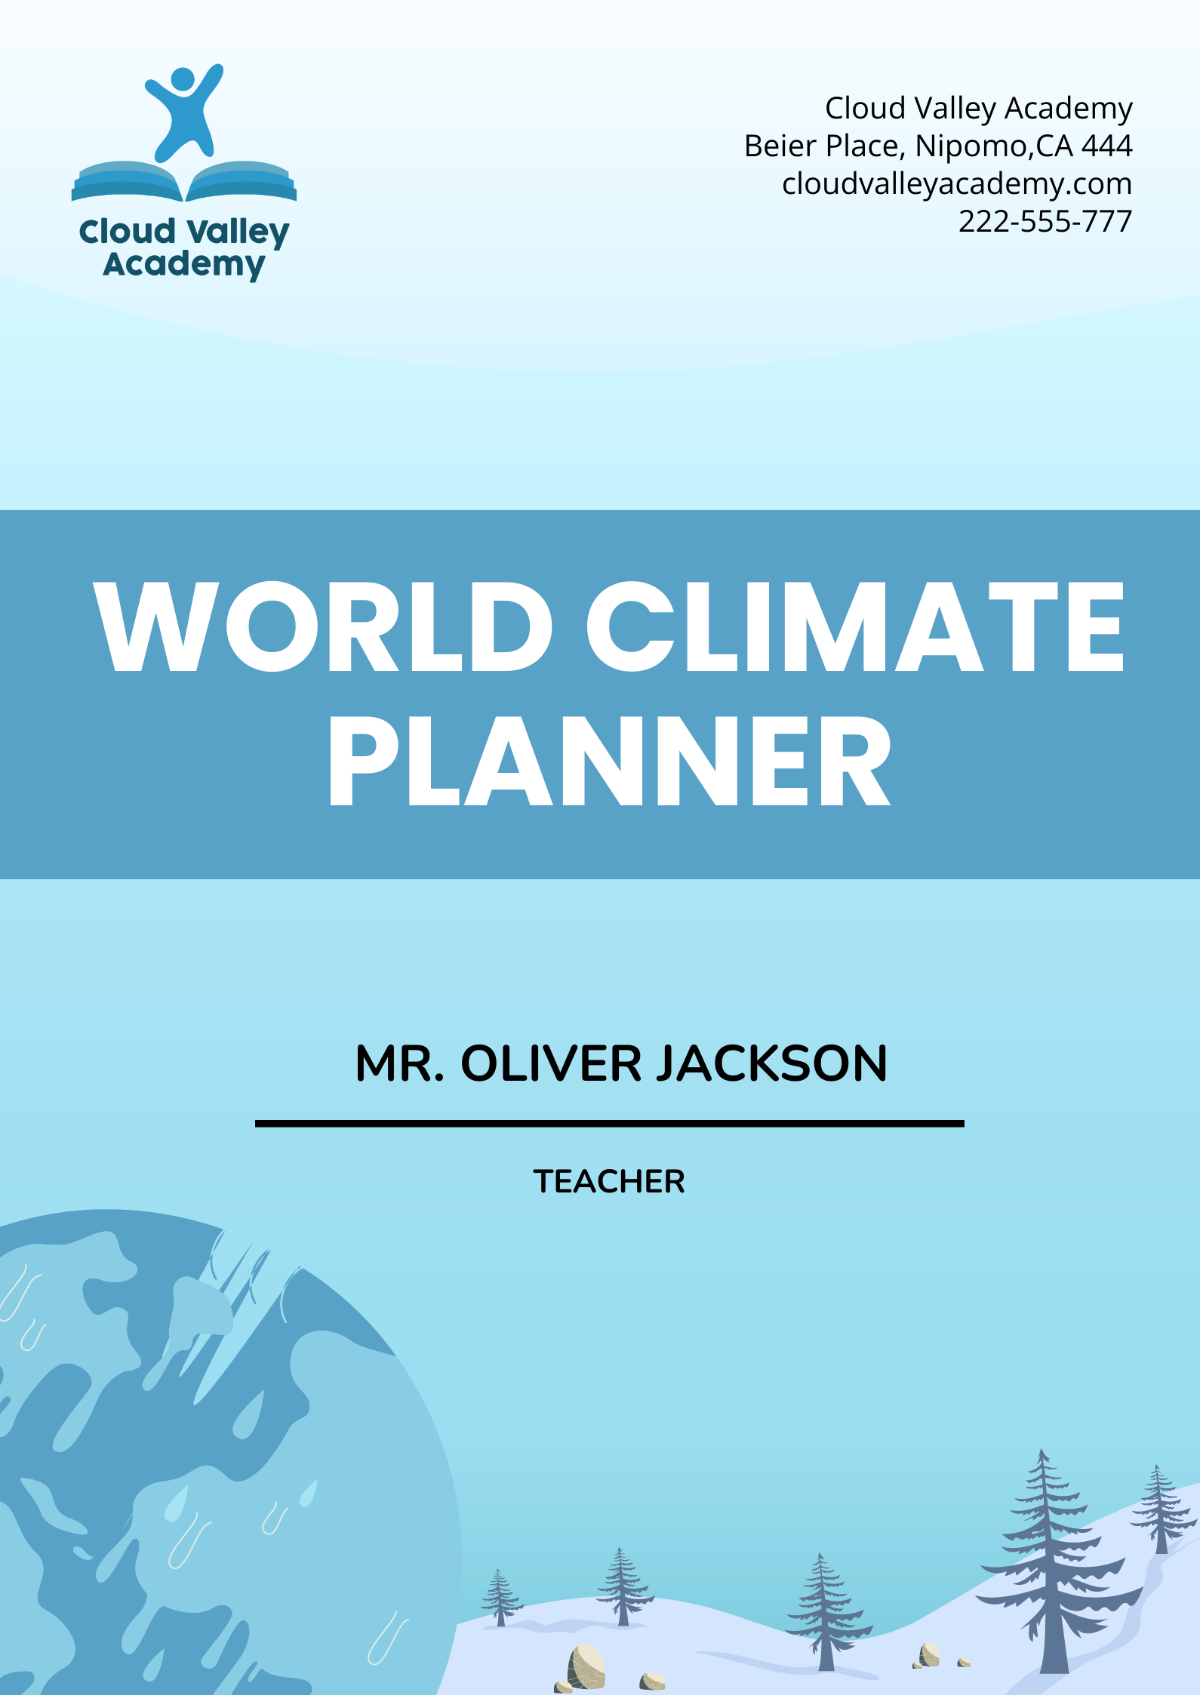 World Climate Planner Template